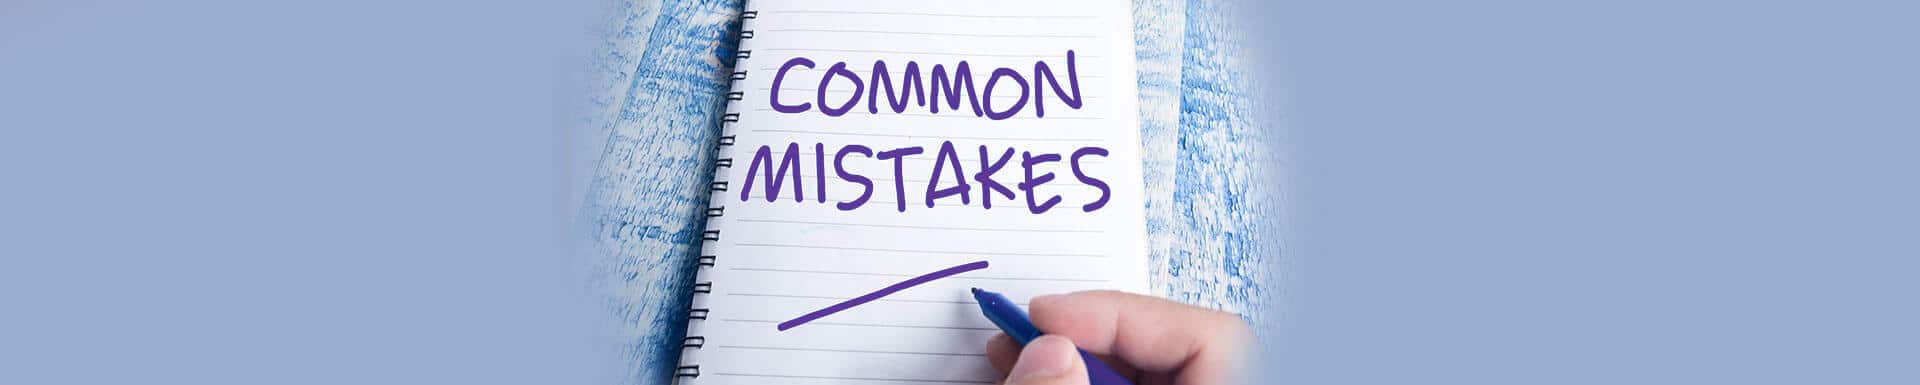 10 Common Grammar Mistakes That Will Ruin Your Writing